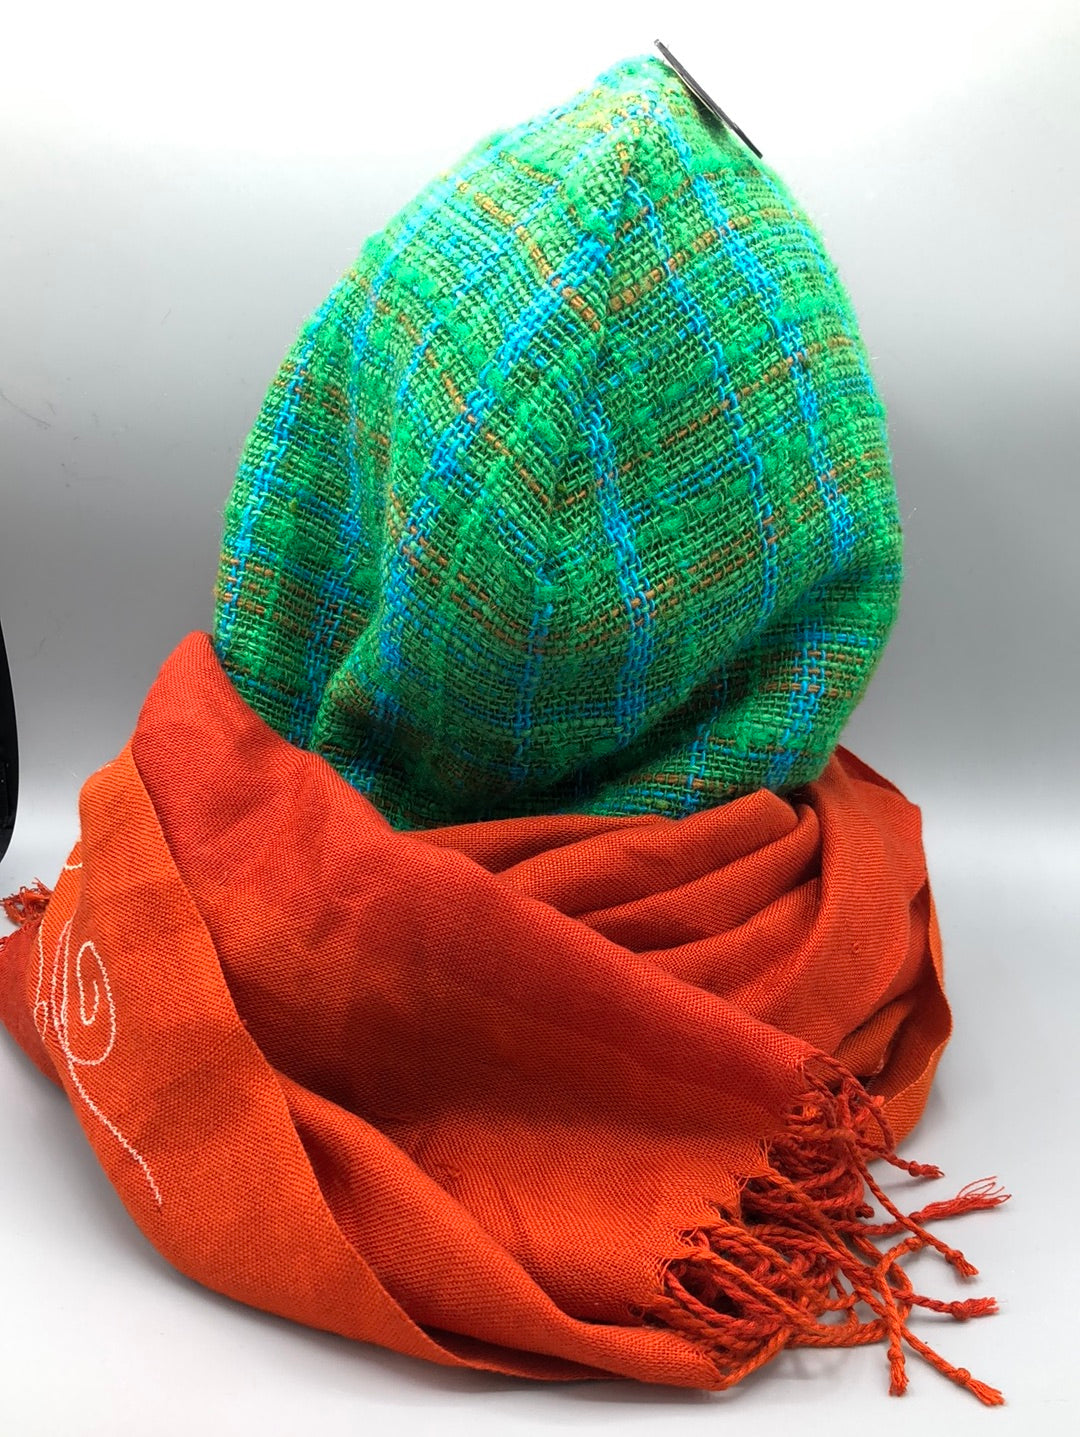 Green  Woven Hood with Sage Green Fleece Liner and deep orange embroidered Scarf